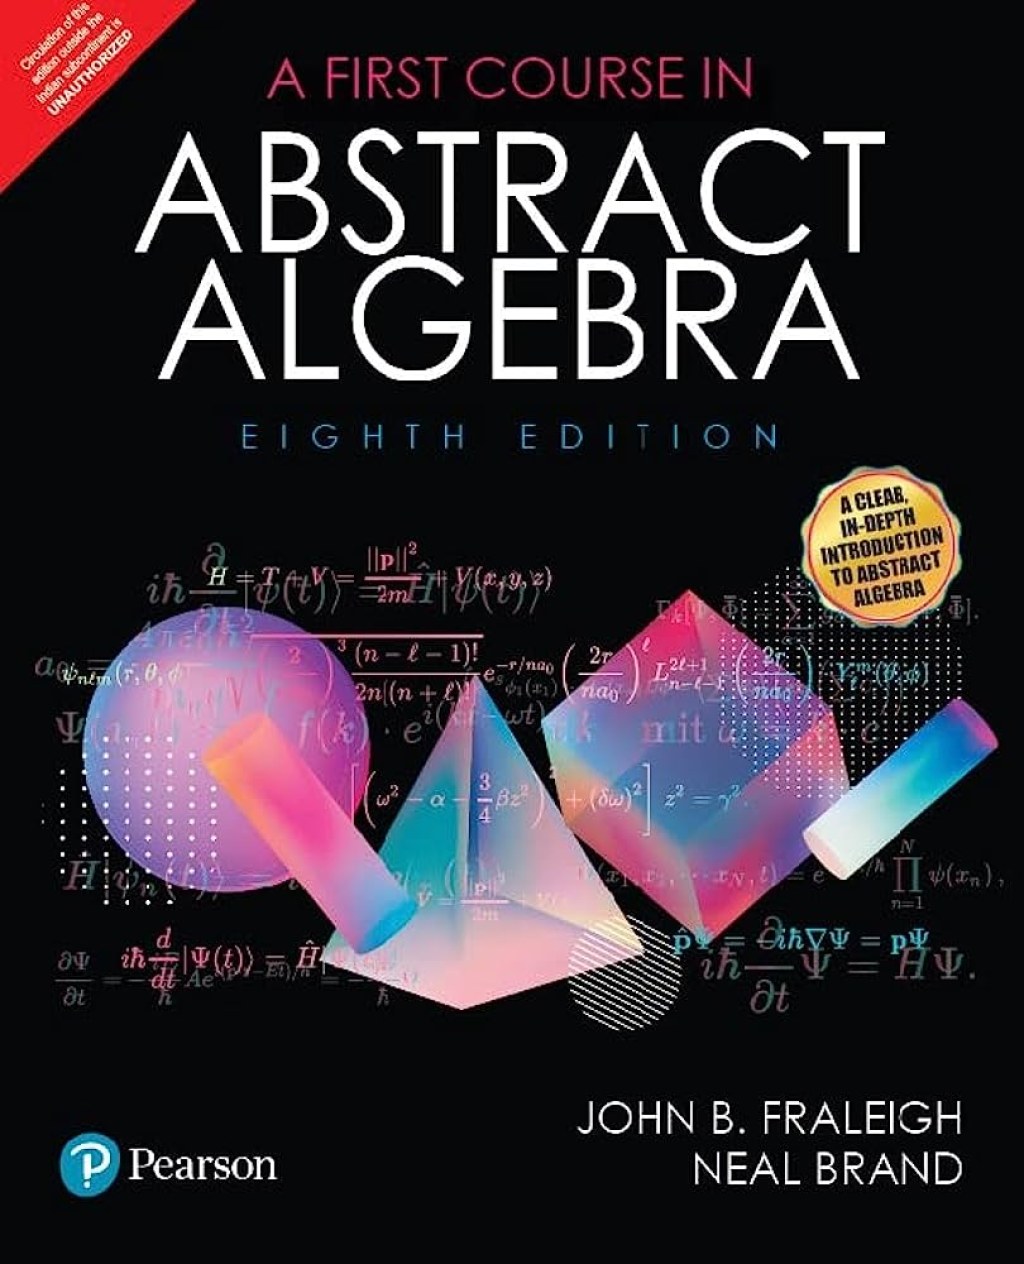 Picture of: FIRST COURSE IN ABSTRACT ALGEBRA, TH EDITION